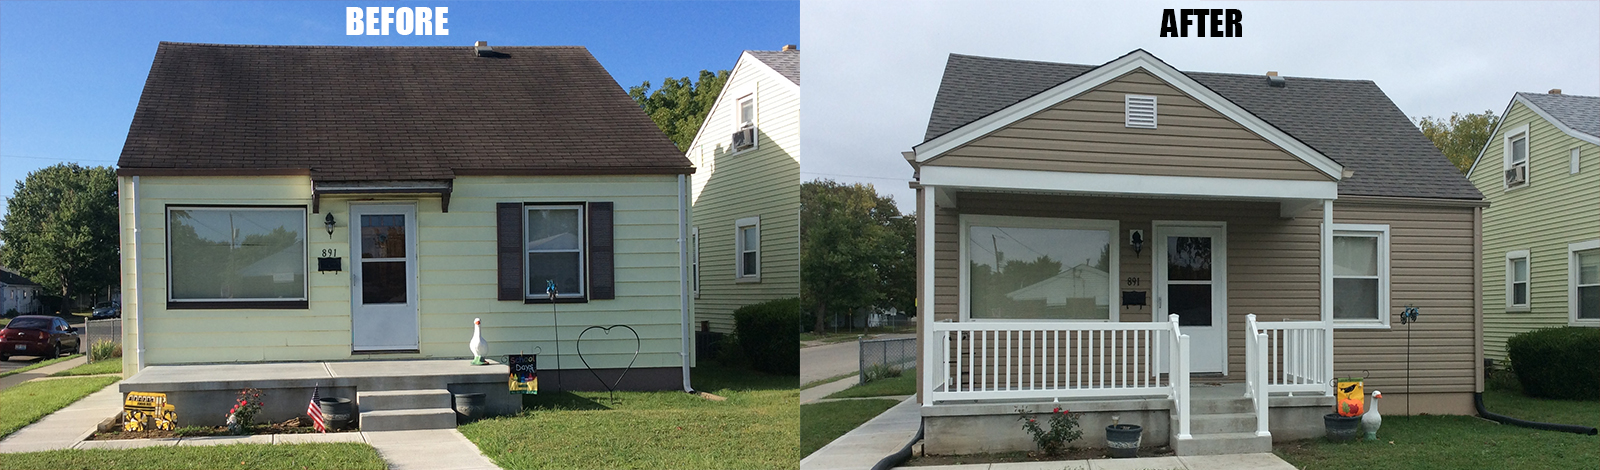 Home Improvement Before & After